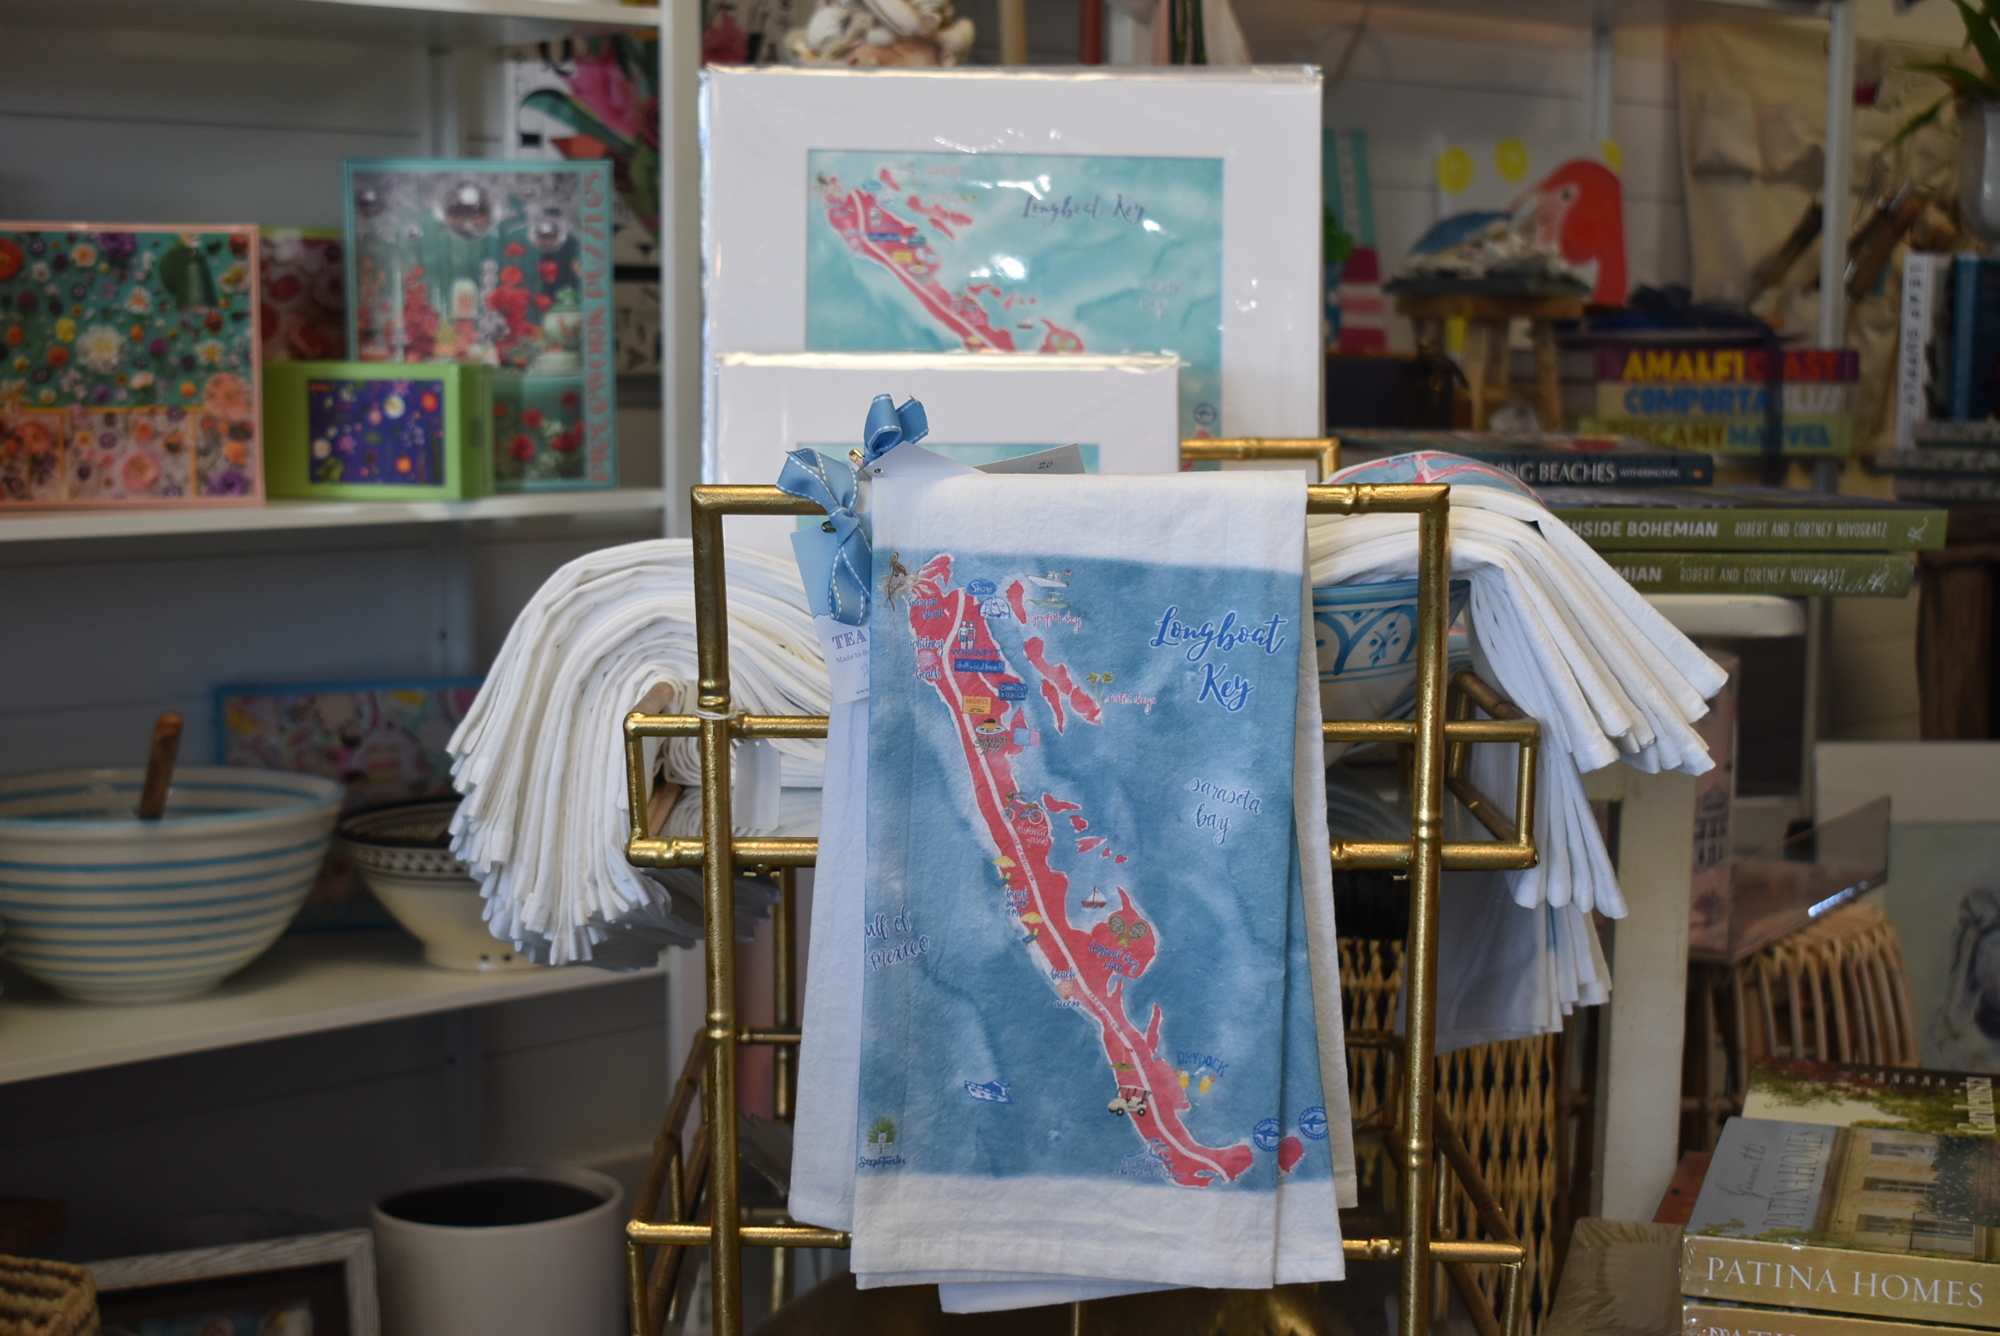 Find Troxler's Longboat Key map at Driftwood Beach Home and Garden.